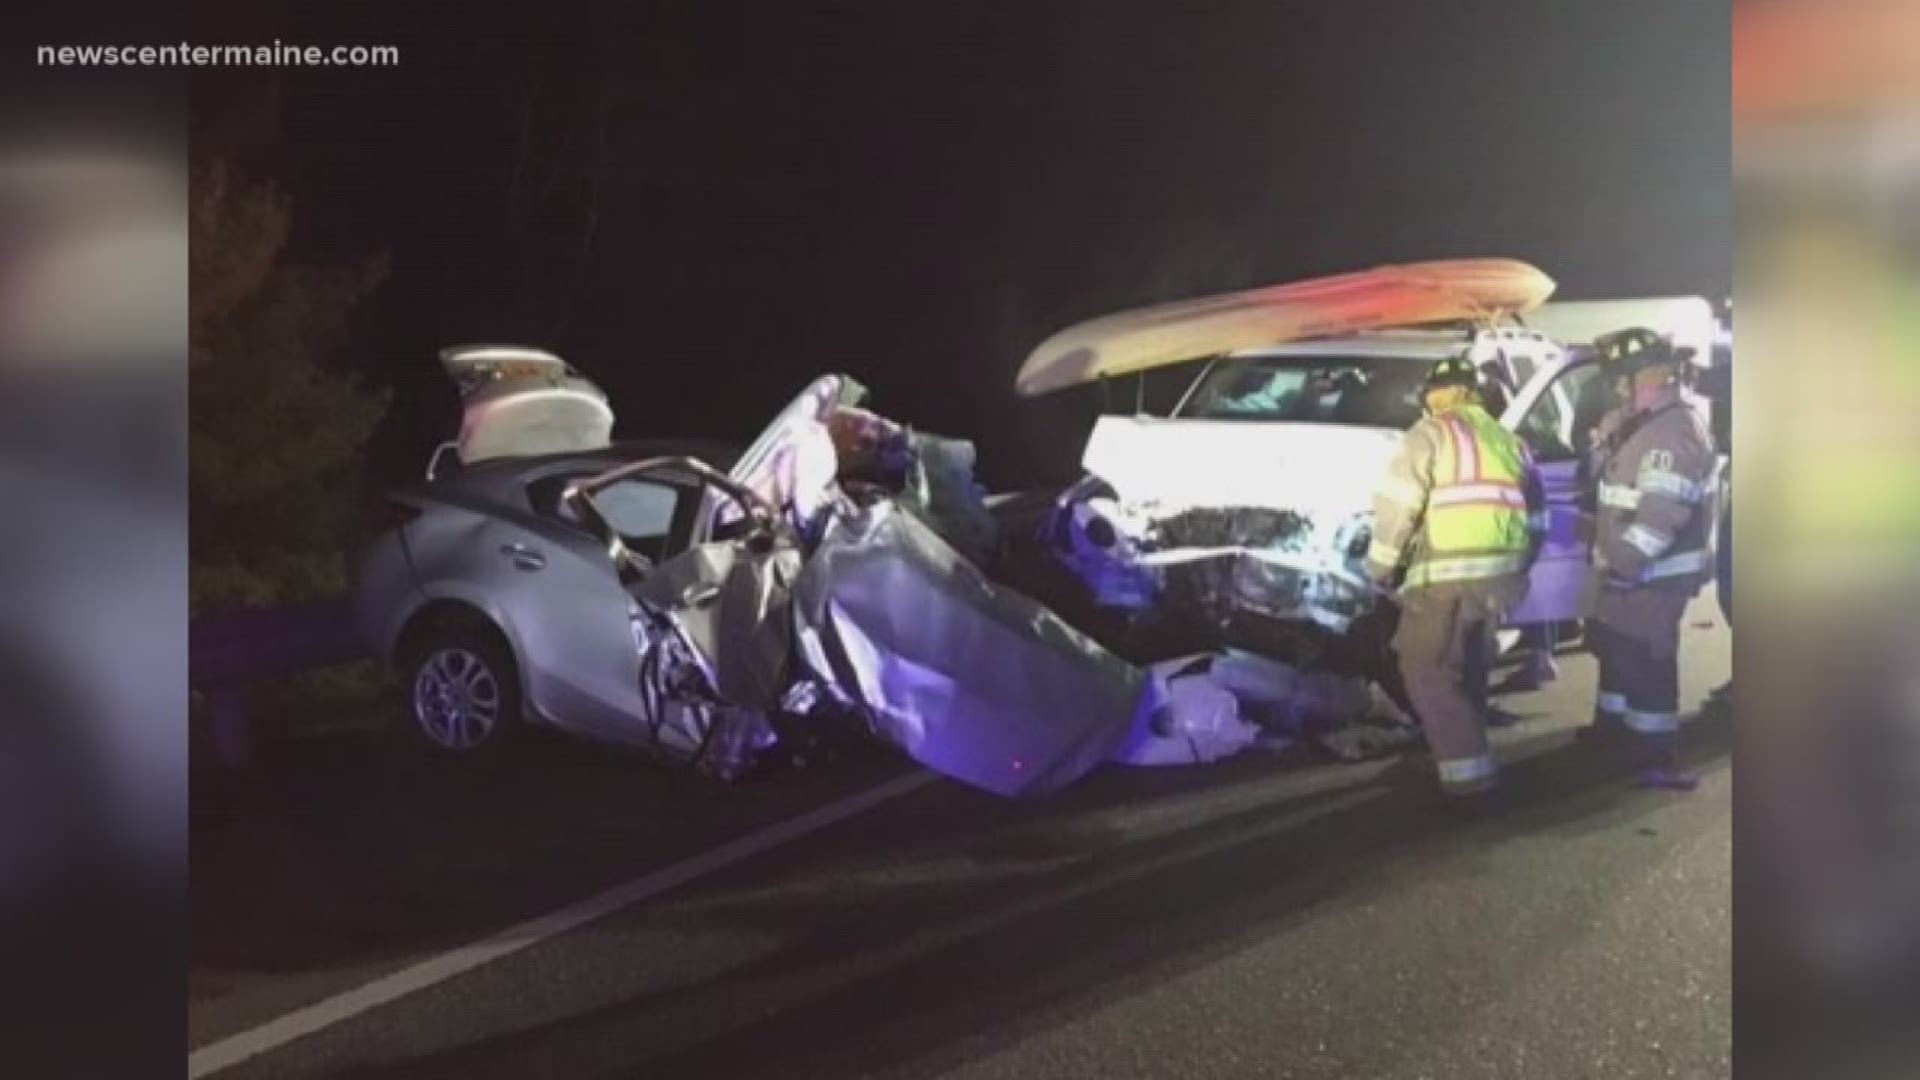 Police say 22-year-old Sierra Prescott of Saco was driving her car in the wrong lane of the highway when she crashed head-on with two other vehicles.